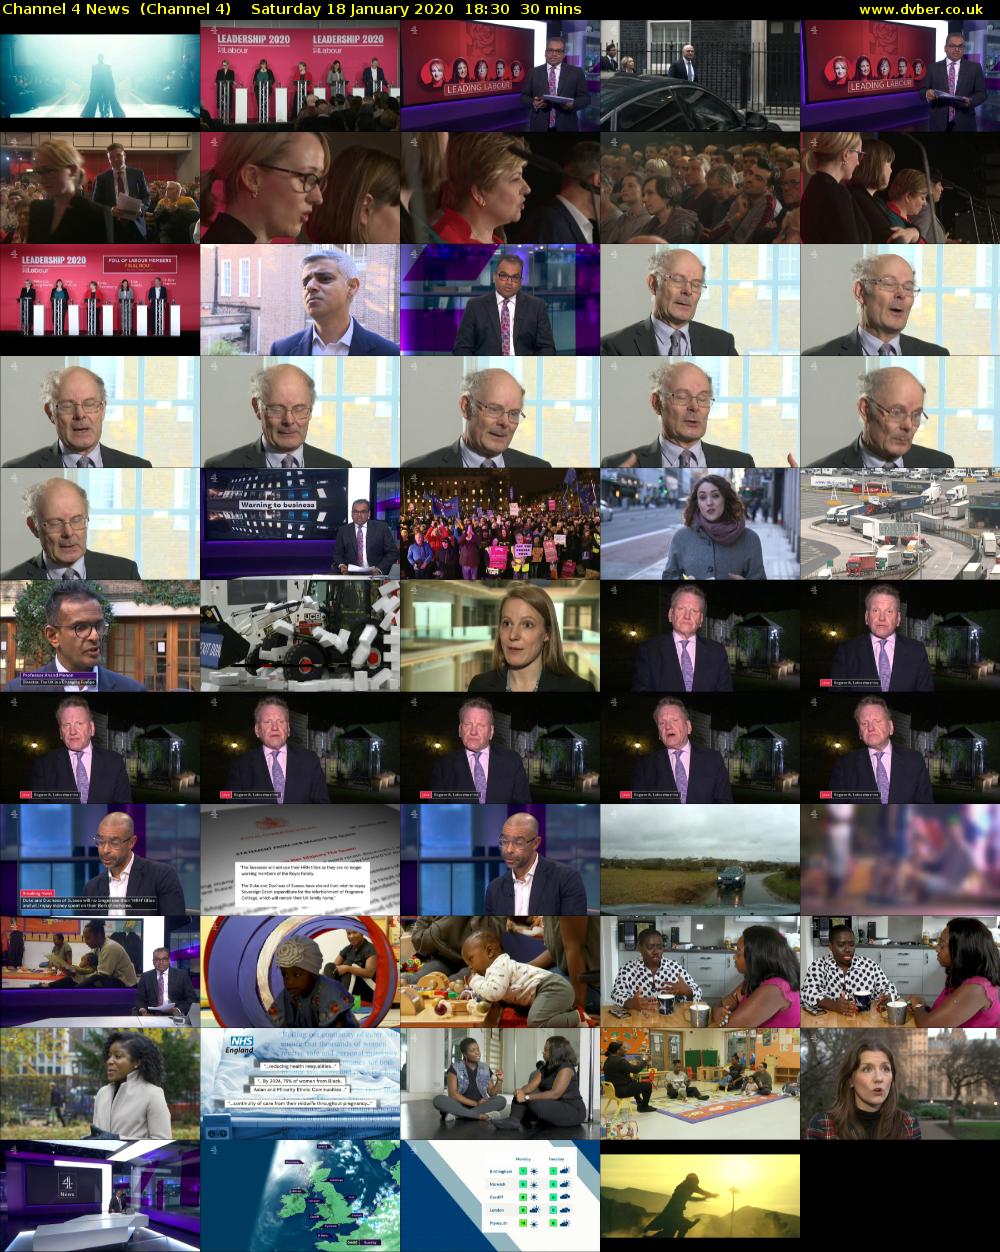 Channel 4 News  (Channel 4) Saturday 18 January 2020 18:30 - 19:00